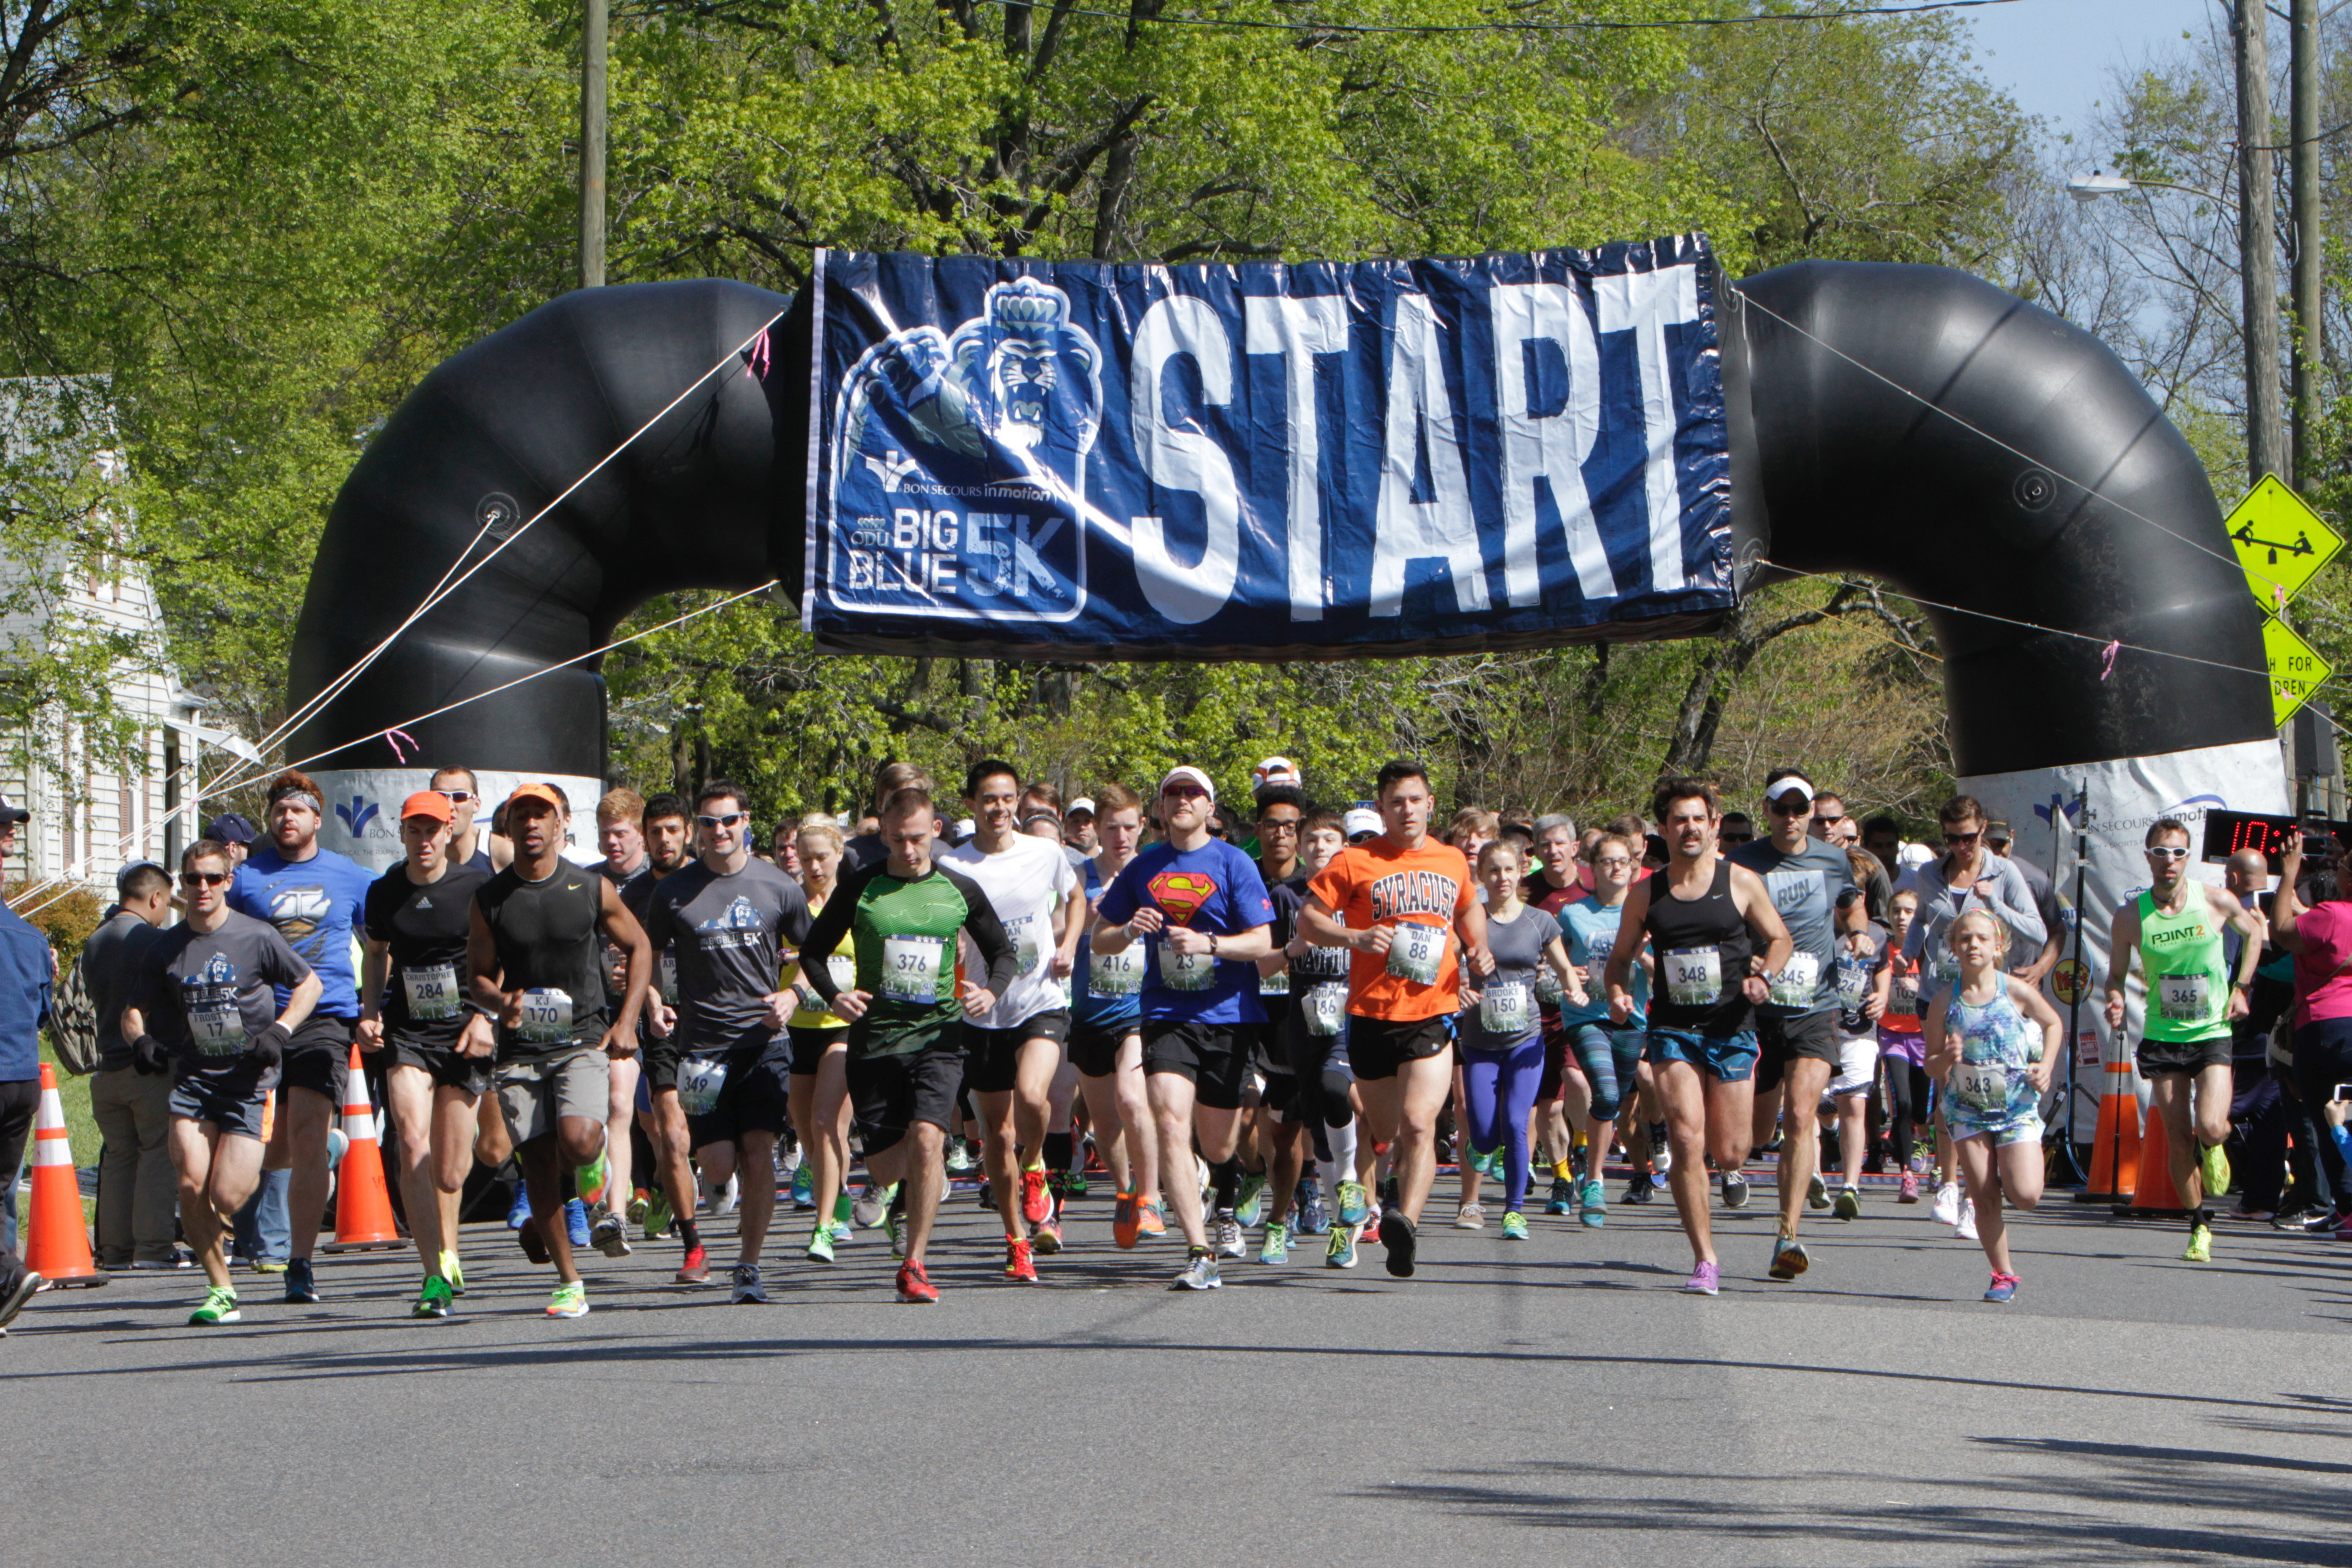 J &amp; A Racing and the Old Dominion Athletic Foundation (ODAF) hosted the Bon Secours in Motion ODU Big Blue 5K and 1K on April 16, 2016 at Foreman Field at S.B Ballard Stadium. The 5K took runners and walkers through the ODU Campus, they finished in Foreman Field at S.B. Ballard Stadium.